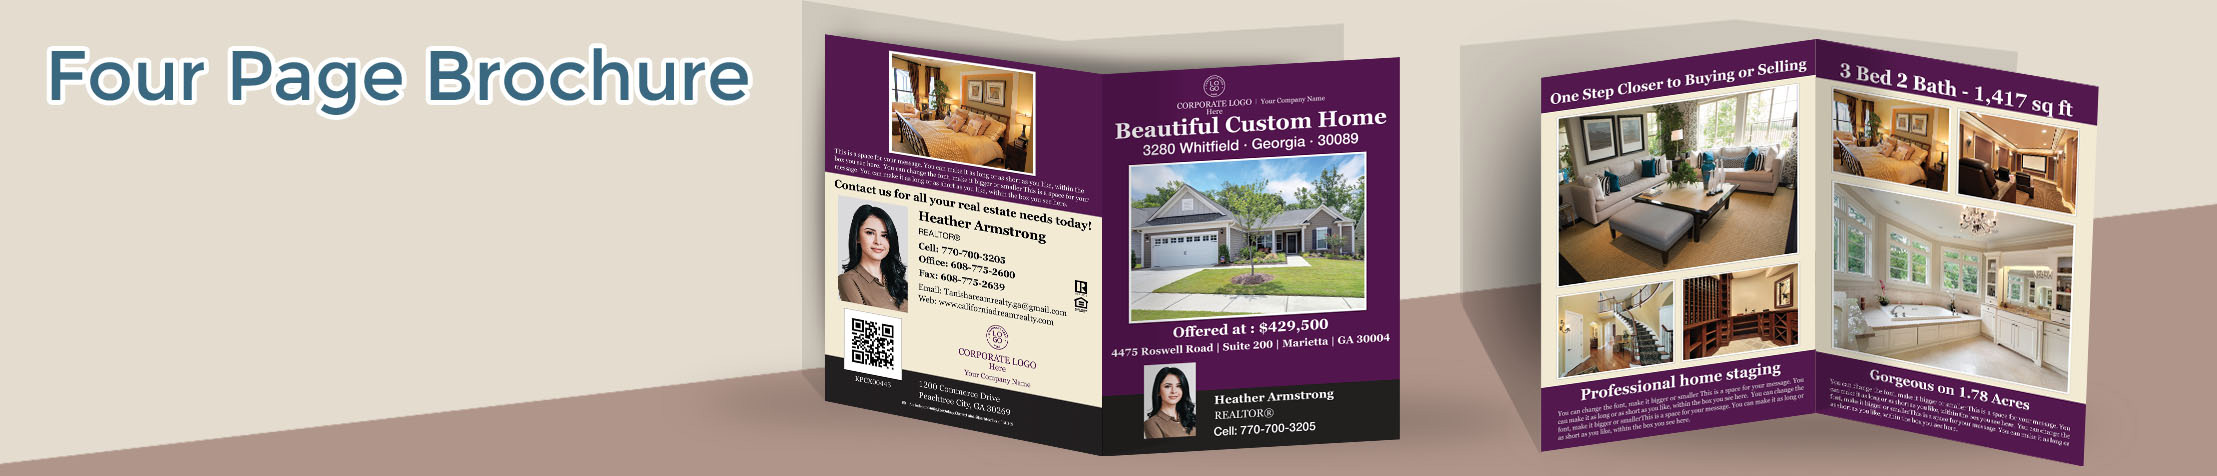 Berkshire Hathaway Real Estate Flyers and Brochures - Berkshire Hathaway four page brochure templates for open houses and marketing | BestPrintBuy.com